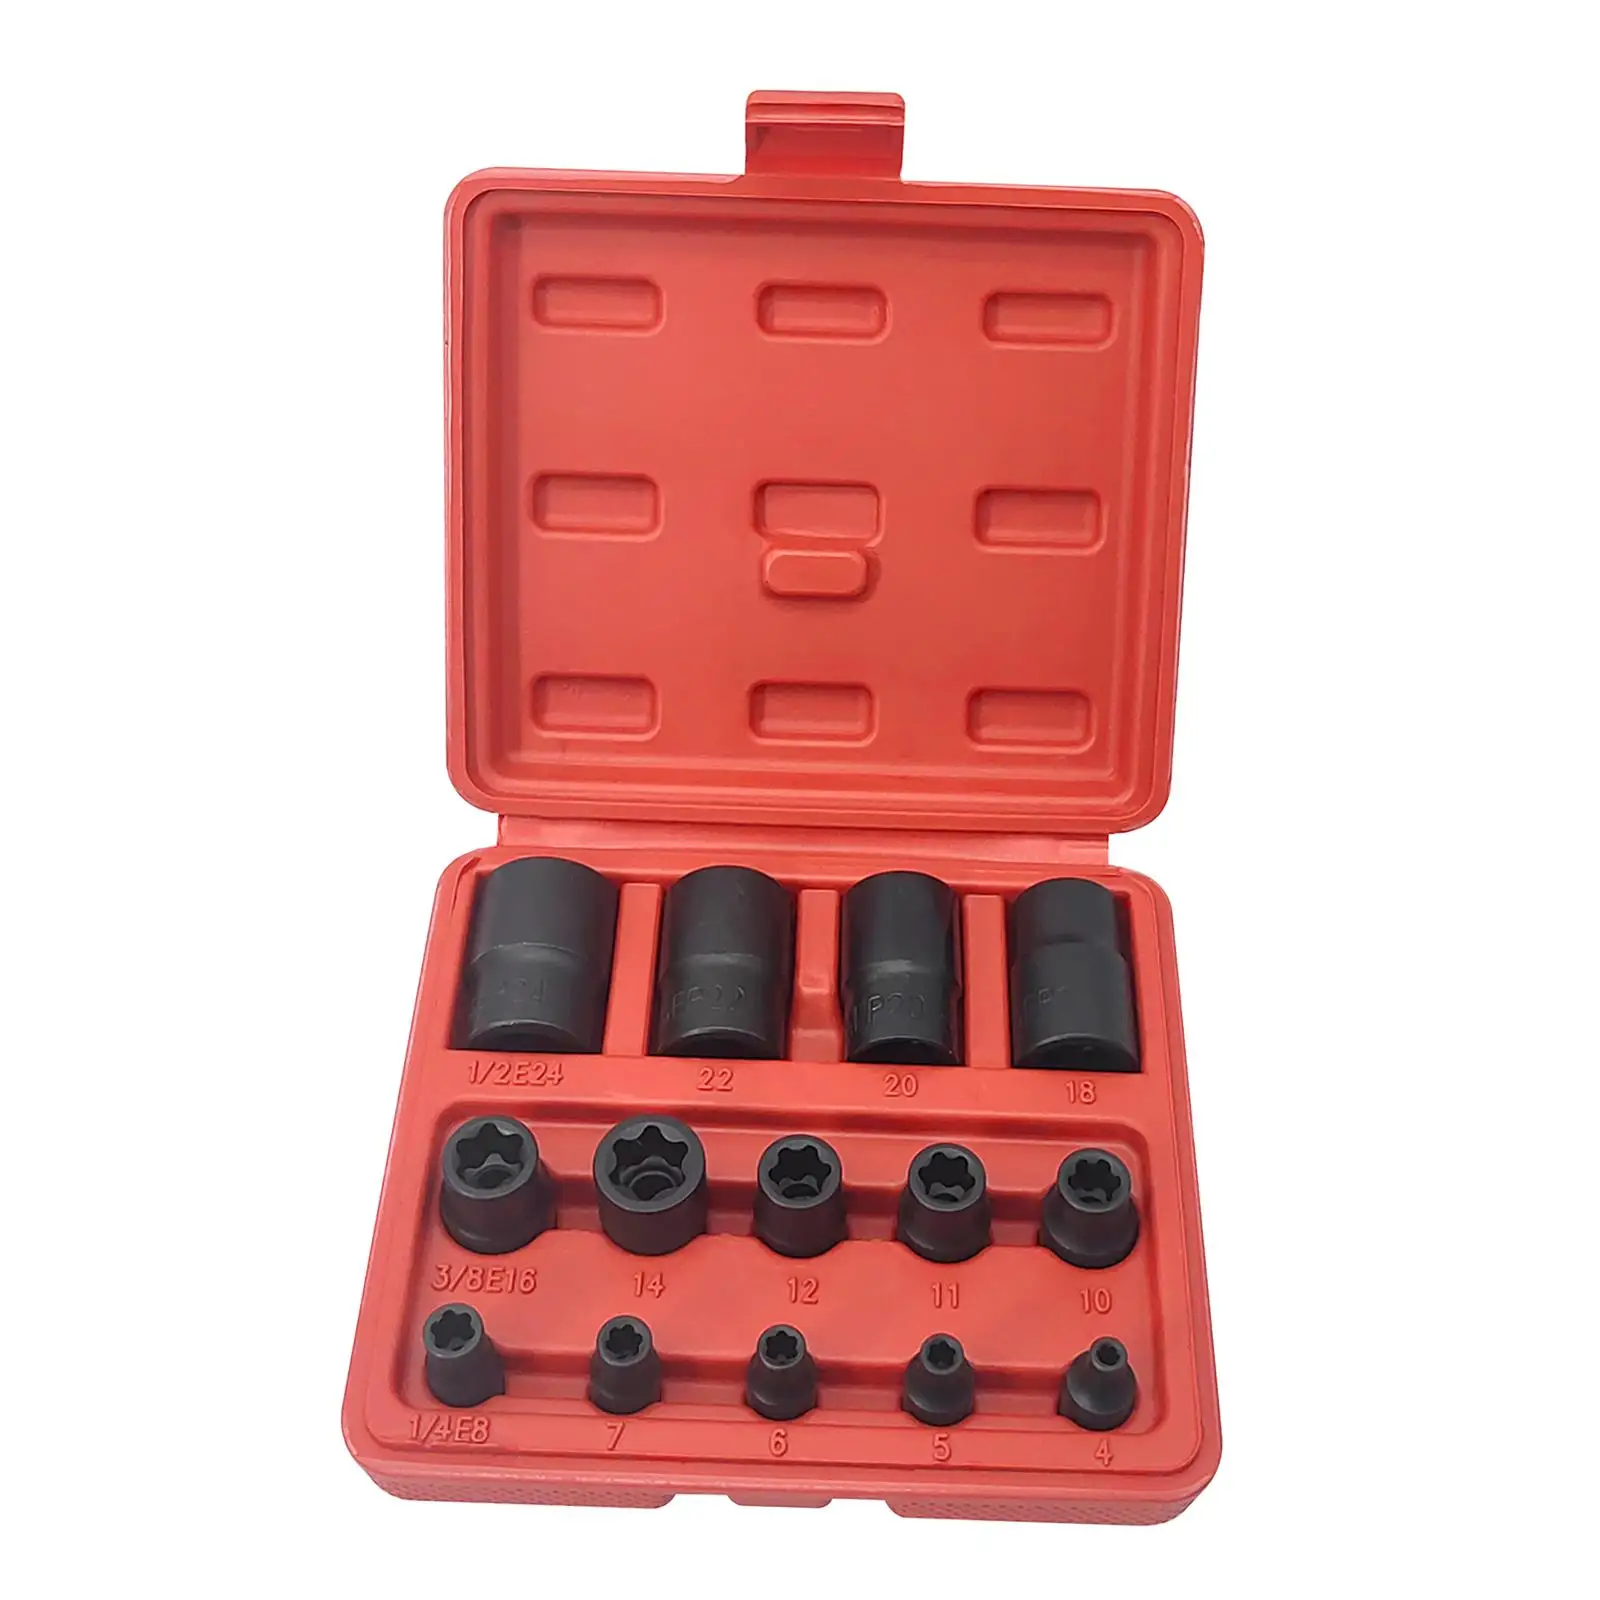  Set, 1/4inch -, 3/8inch EP11-Ep16, with Carry Case, Portable External  Set, 1/2inch EP18-Ep2 Female  Set